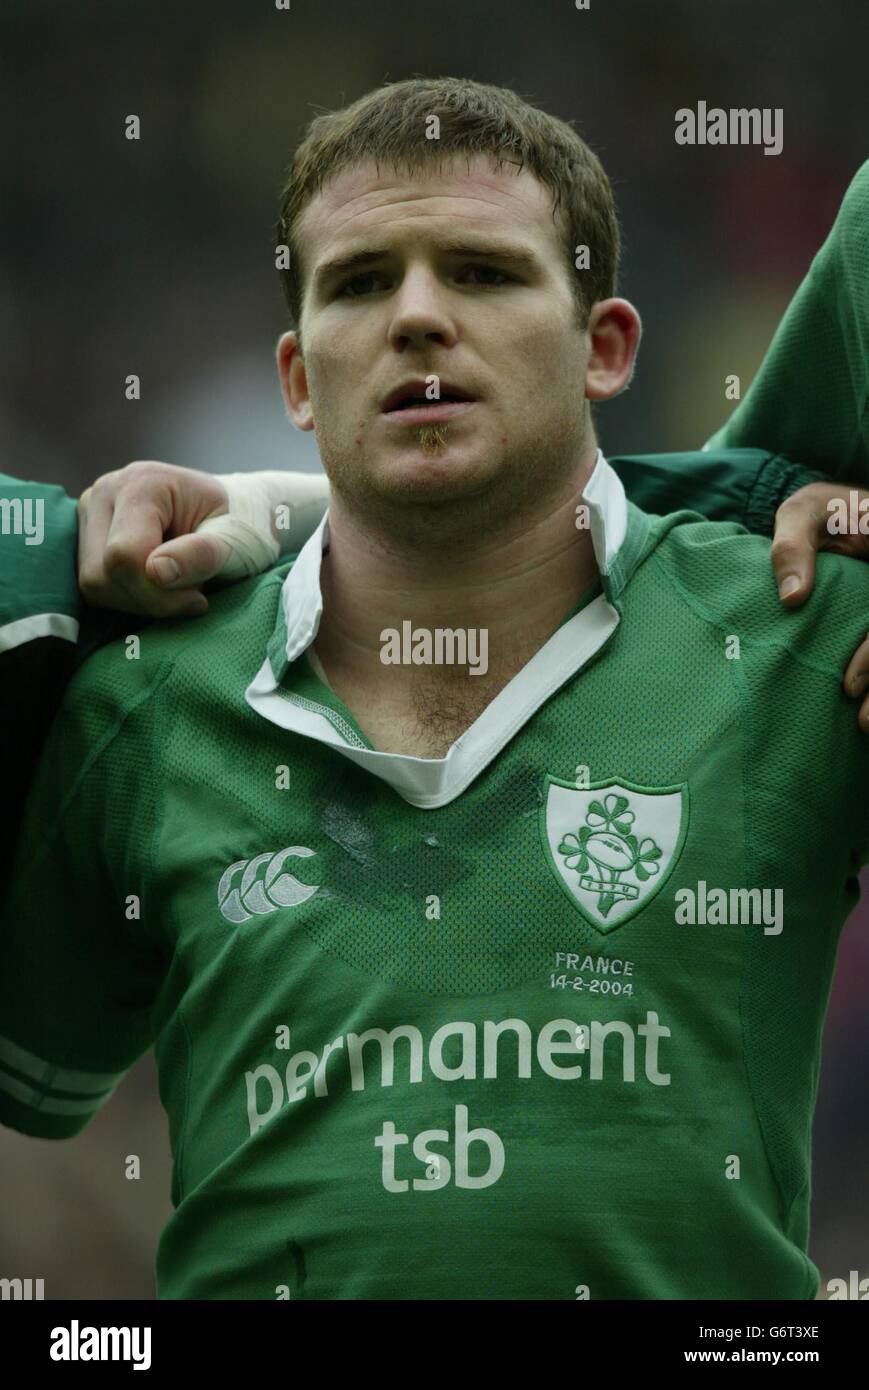 Ireland's Gordon D'arcy lines up before the RBS 6 Nations clash verses France at the Stade de France. Stock Photo